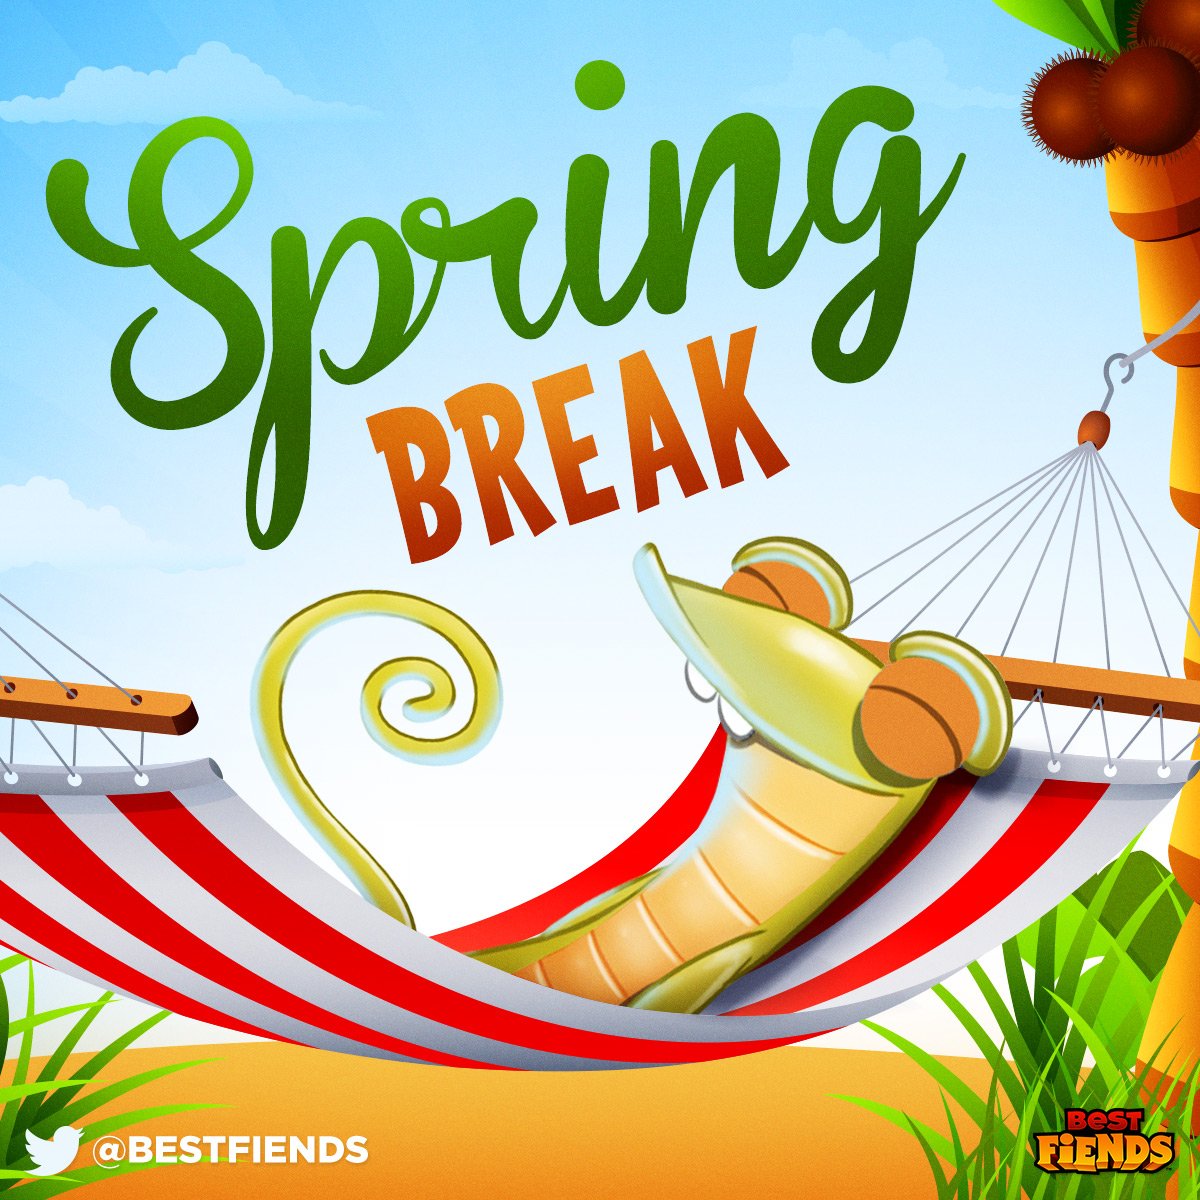 best fiends on twitter: "how many days until spring break? anyone